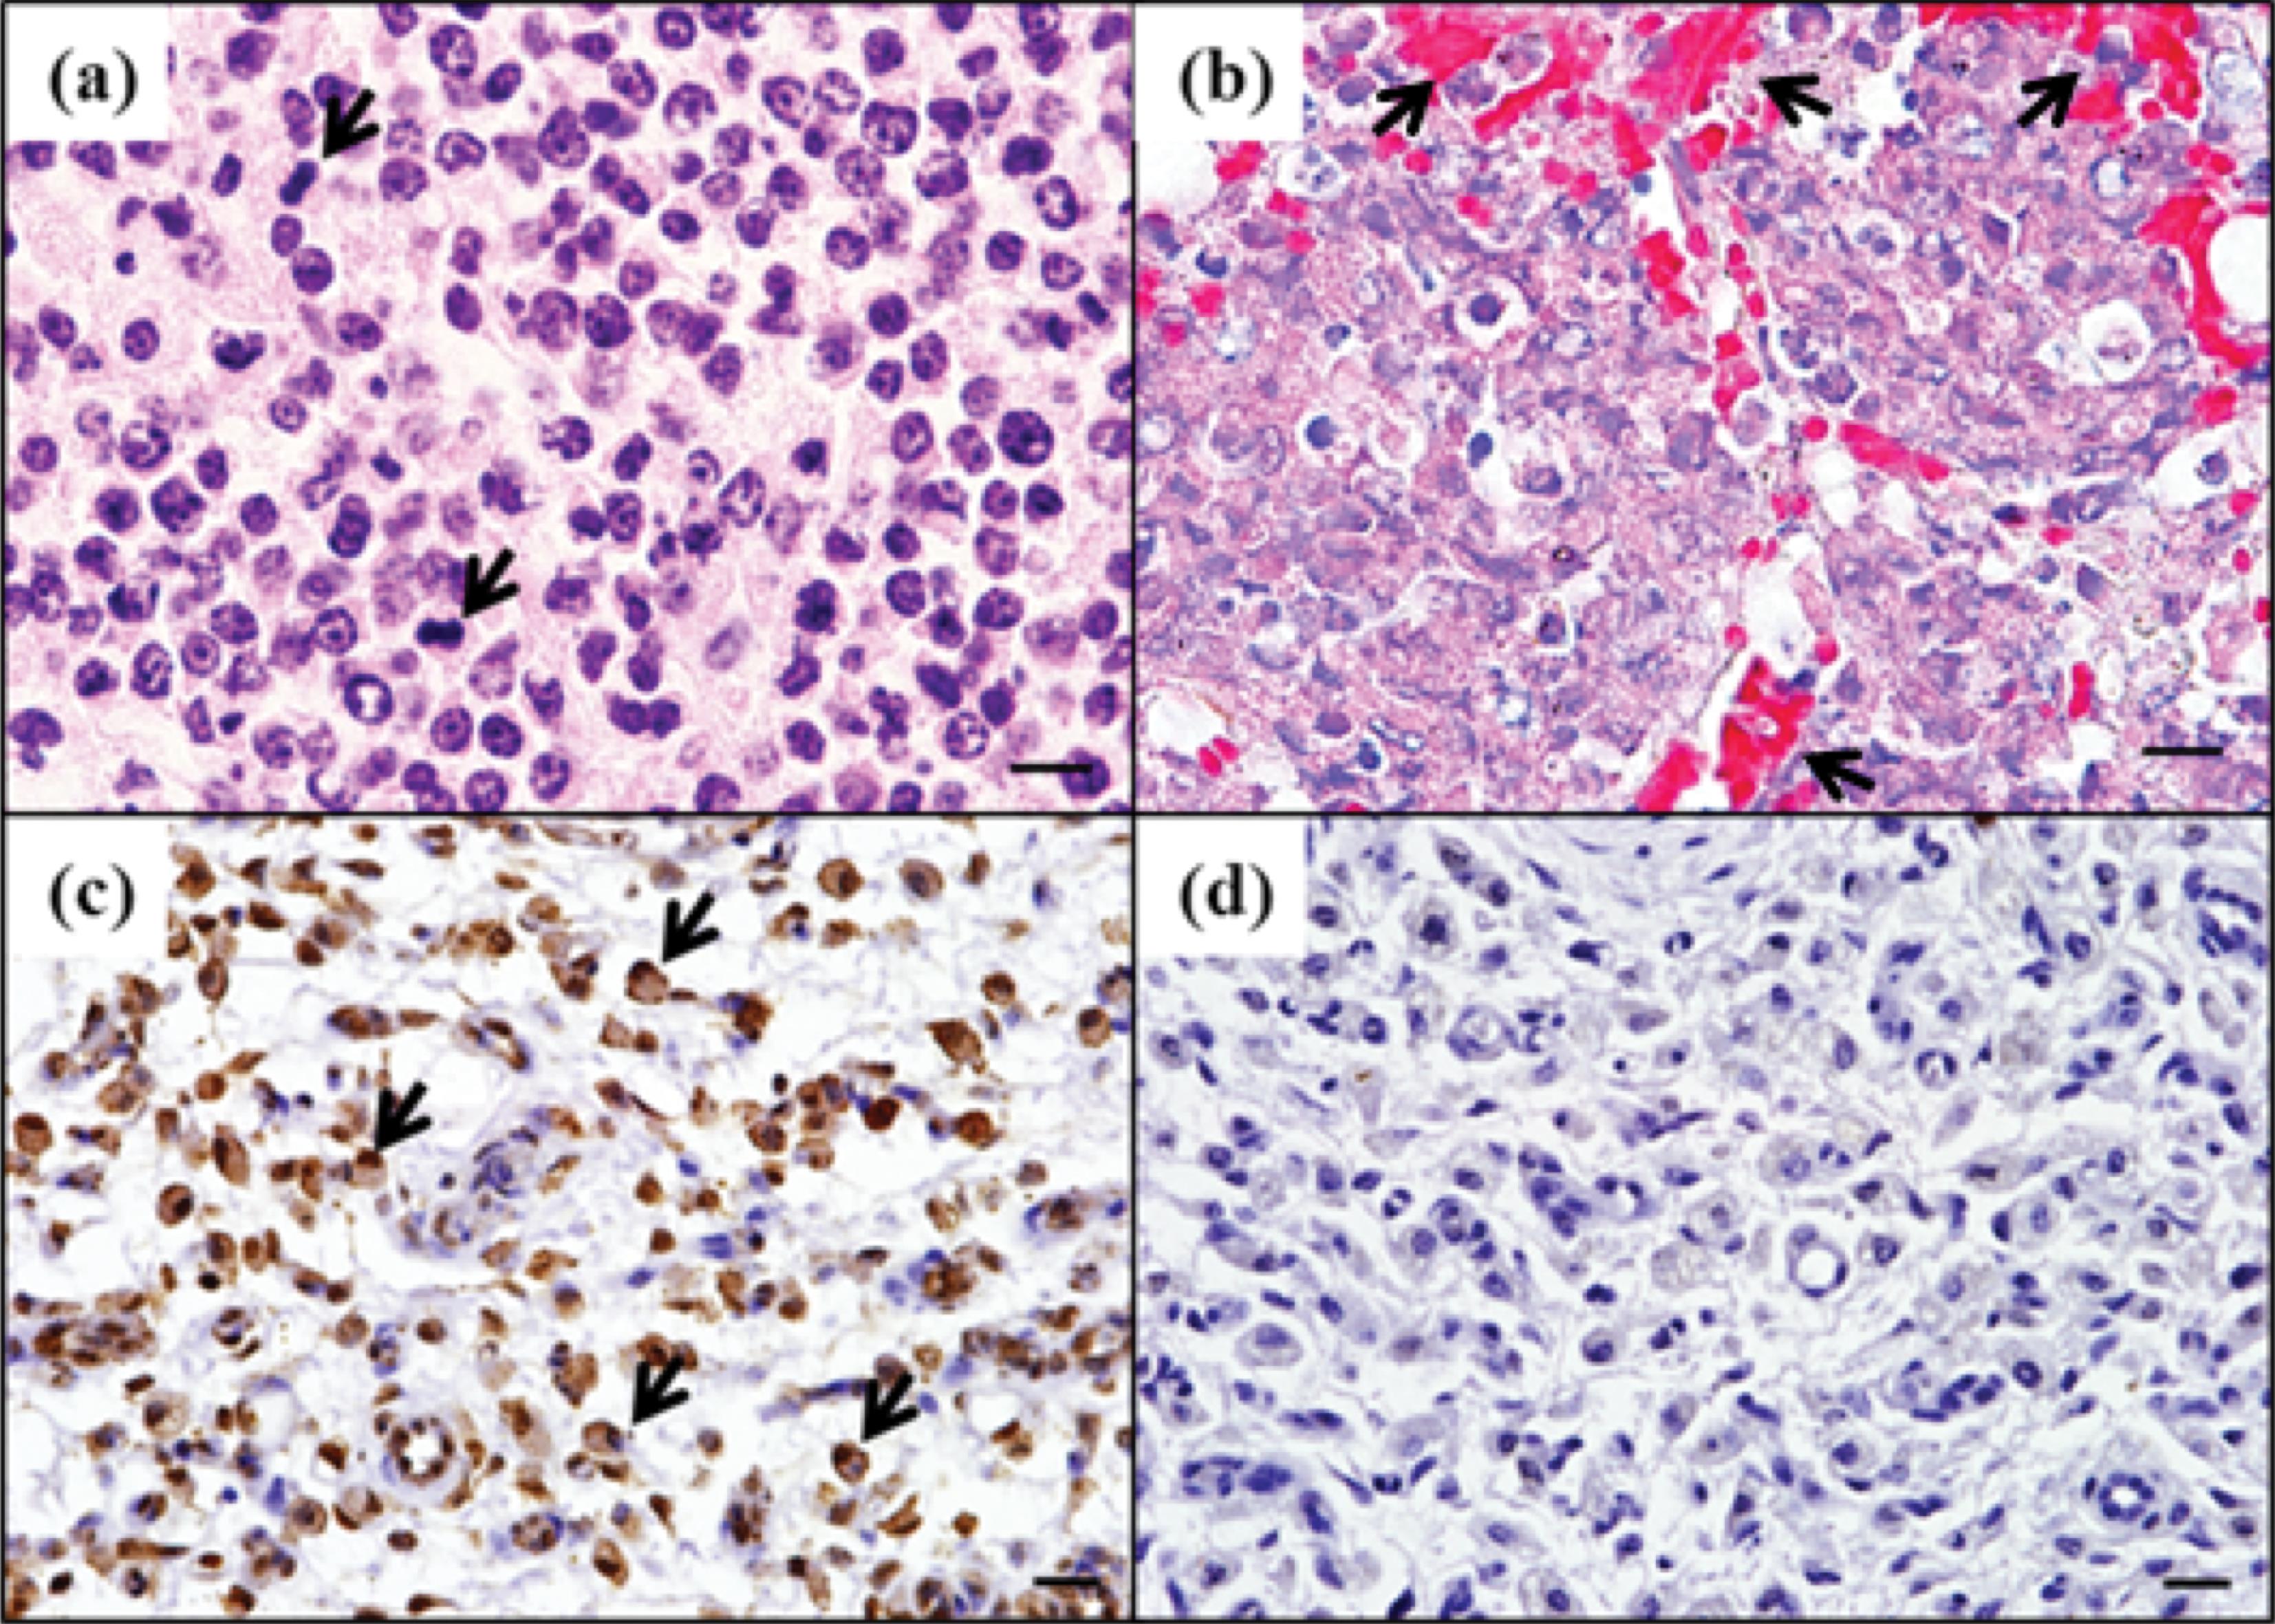 Primary BCell Lymphoma of Submandibular Lymph Node in a Water Deer